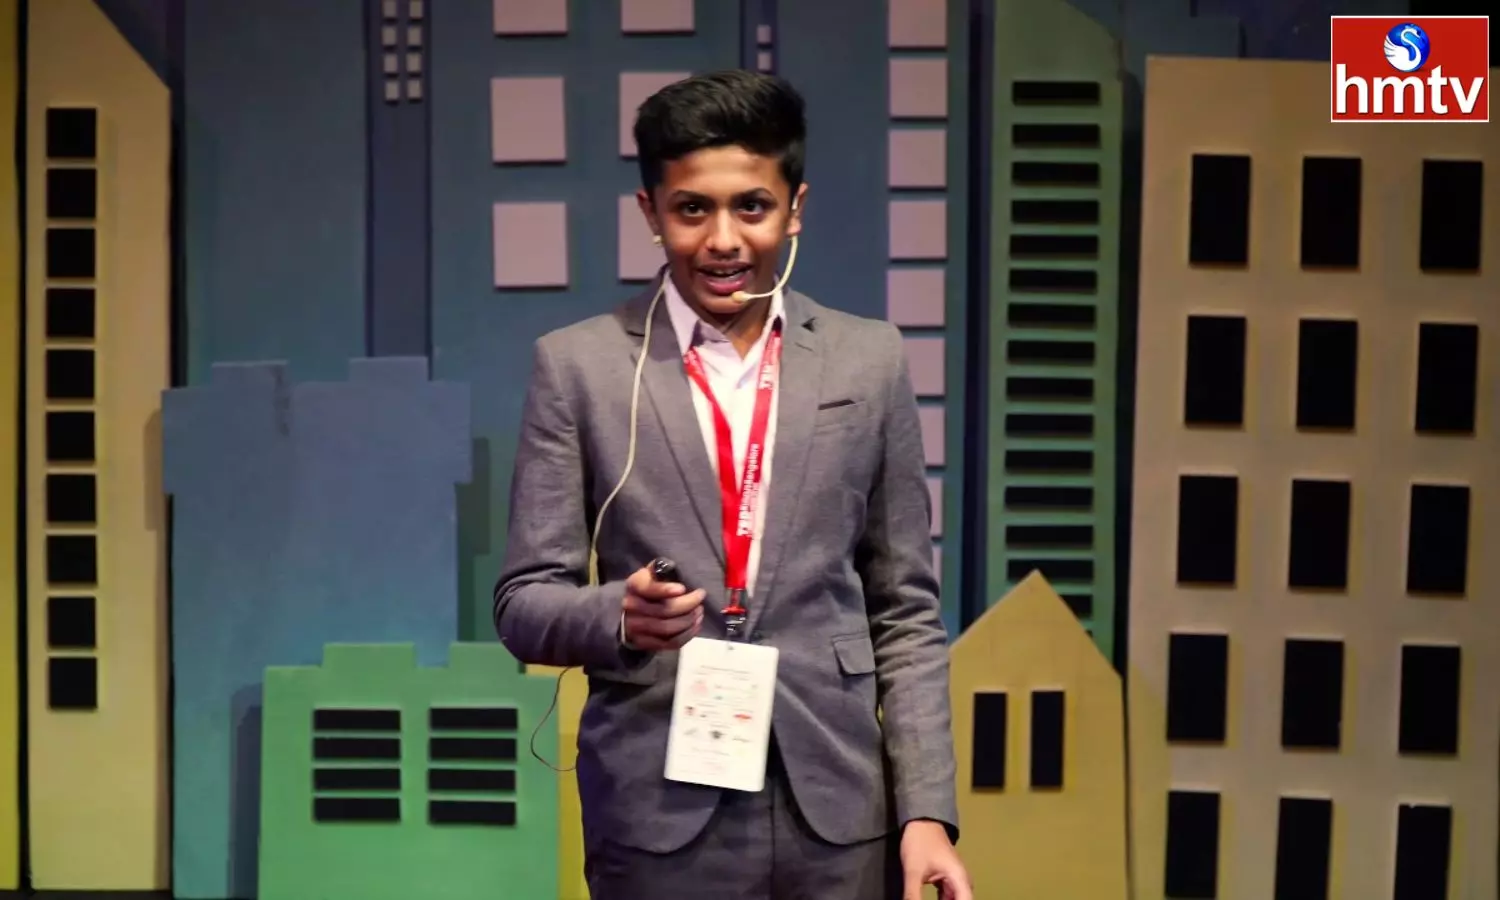 13 Year old Tilak Mehta From Mumbai Established a Company Worth 100 Crores and Providing Employment to More Than 200 People